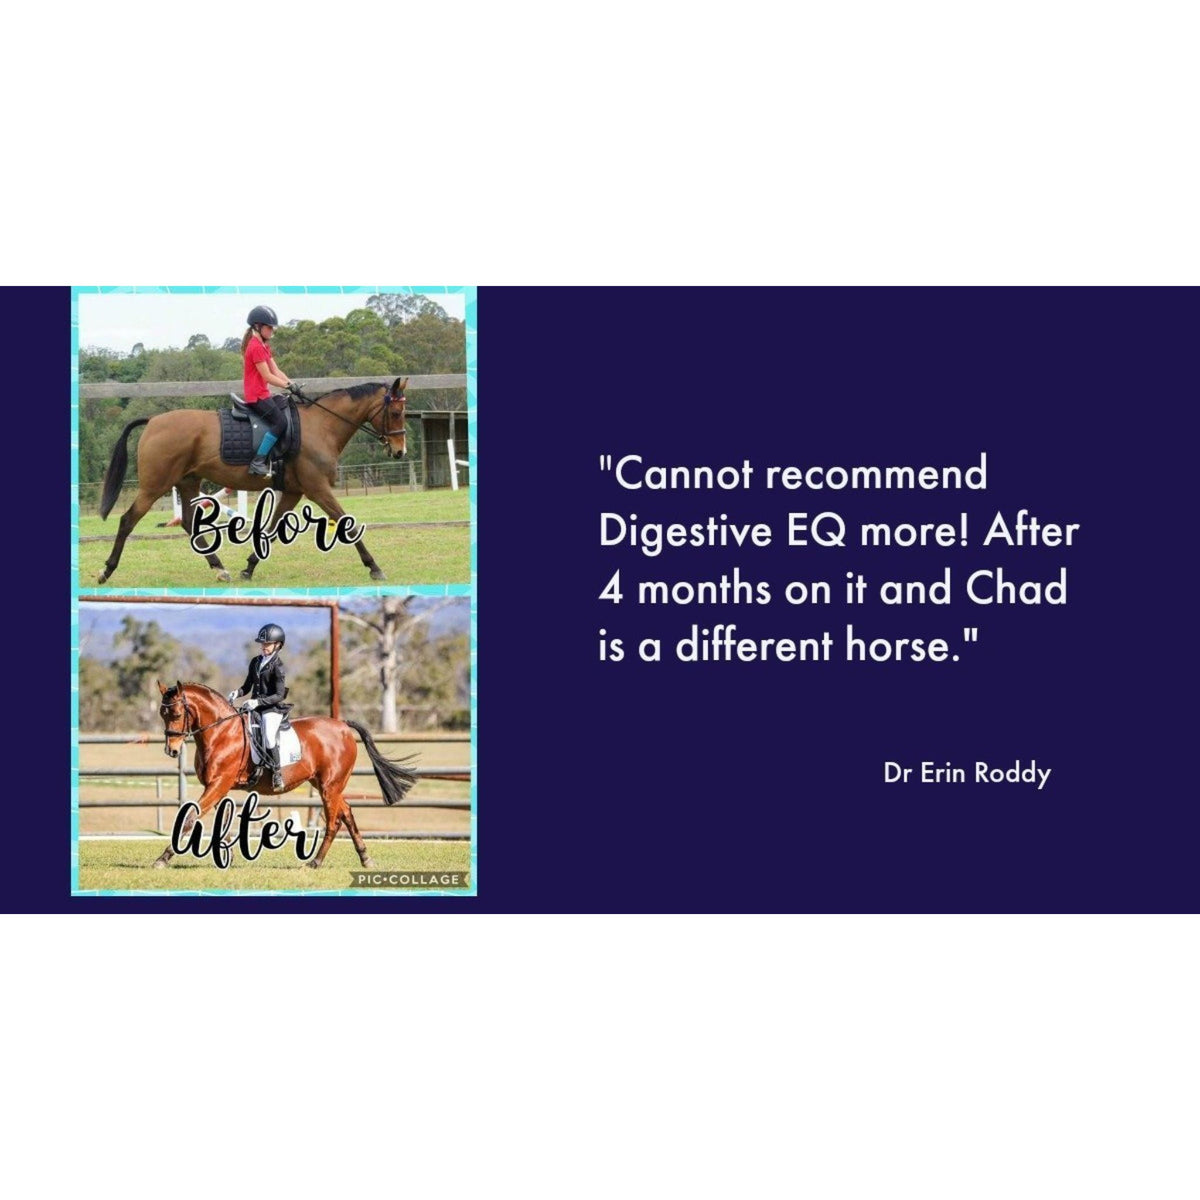 Before and after pictures of horse on Digestive EQ with testimonial quote.